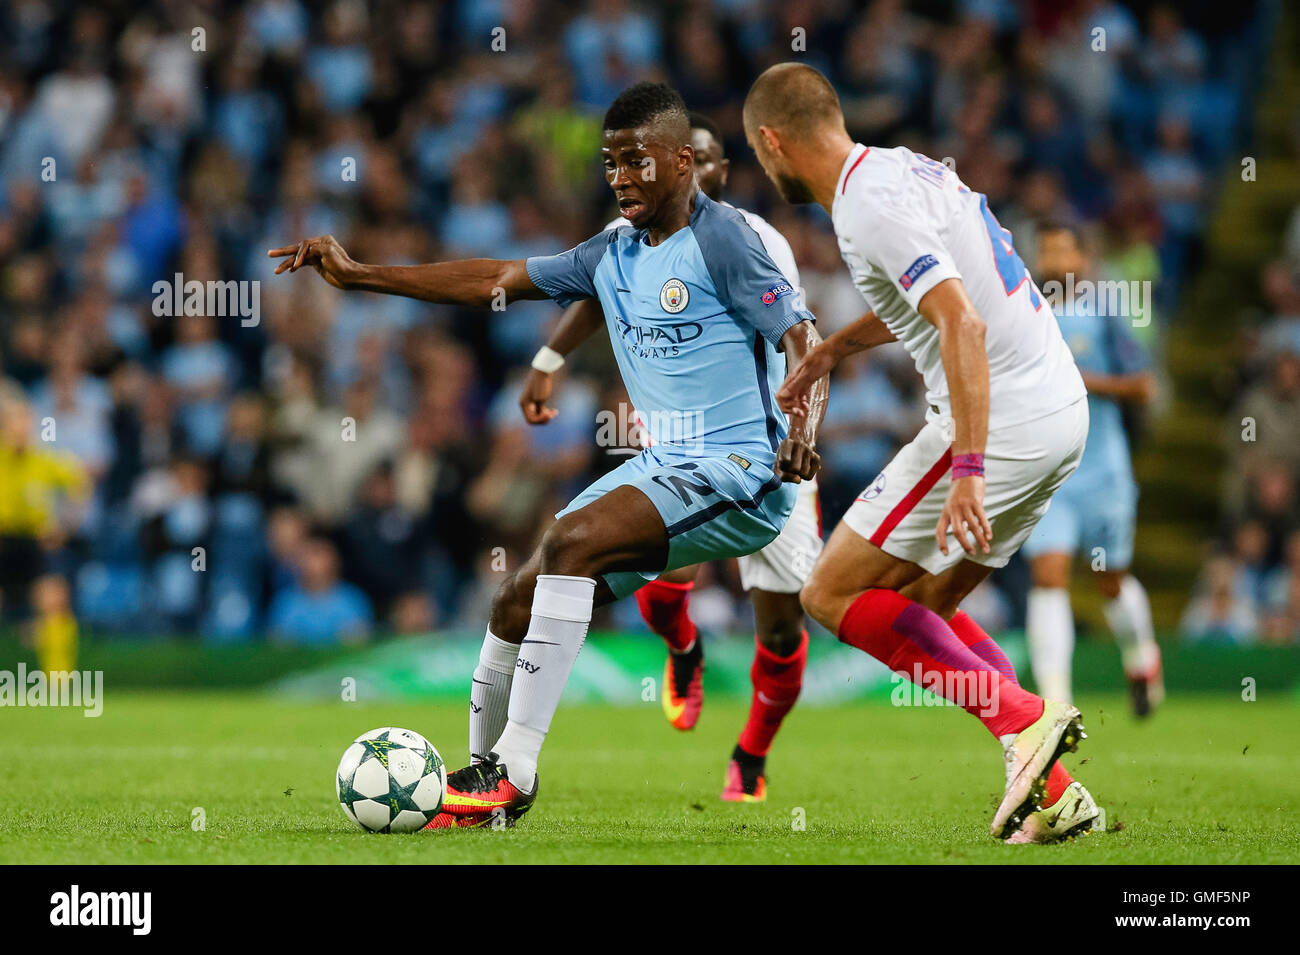 Manchester, UK. 24th Aug, 2016. Kelechi Iheanacho (Man C) Football/Soccer : Kelechi Iheanacho of Manchester City during the UEFA Champions League Play-off second leg match between Manchester City and Steaua Bucharest at Etihad Stadium in Manchester, England . © AFLO/Alamy Live News Stock Photo